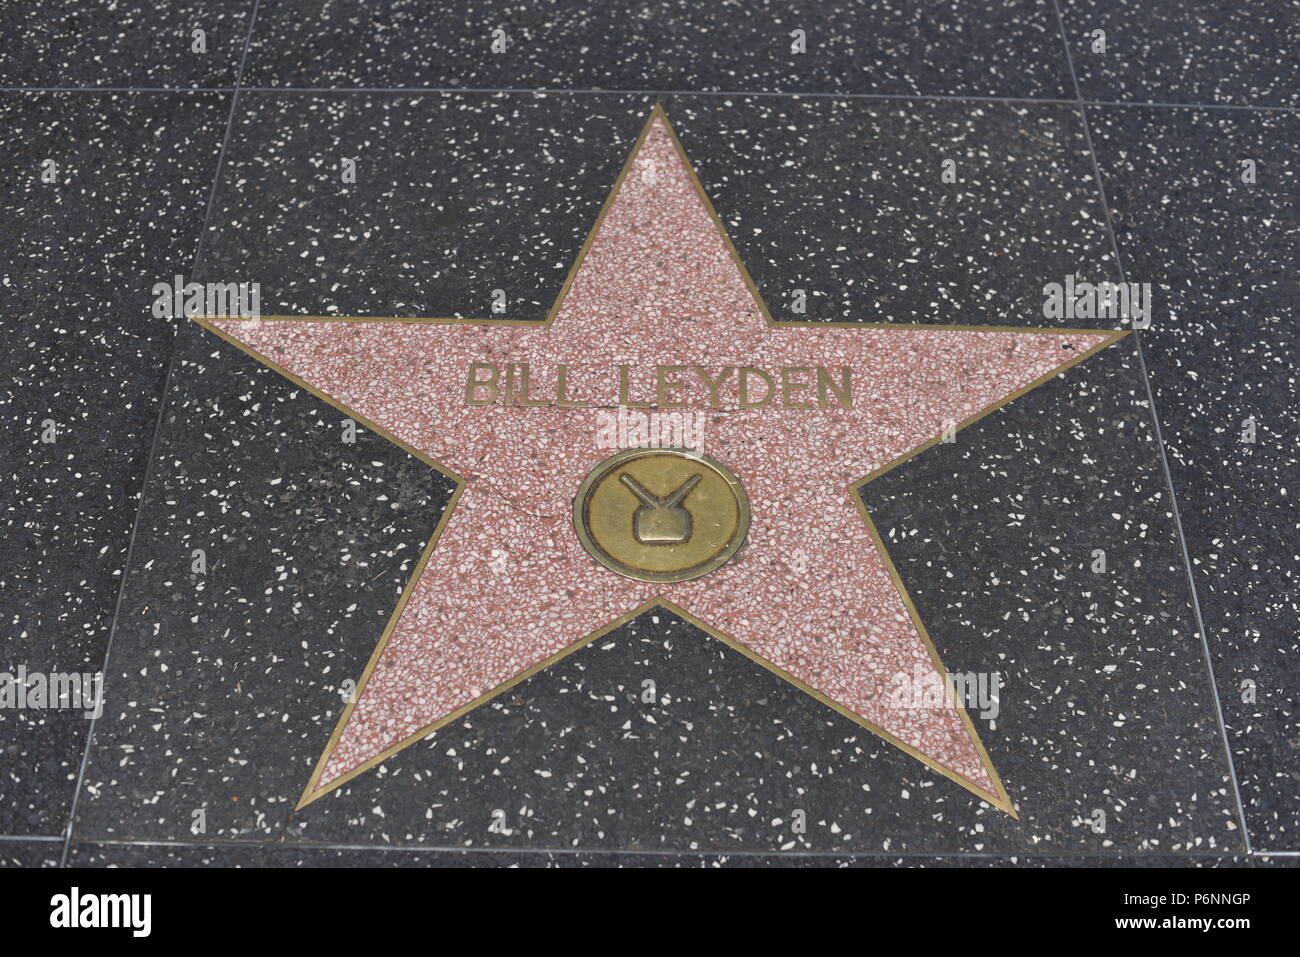 HOLLYWOOD, CA - June 29: Bill Leyden star on the Hollywood Walk of Fame in Hollywood, California on June 29, 2018. Stock Photo